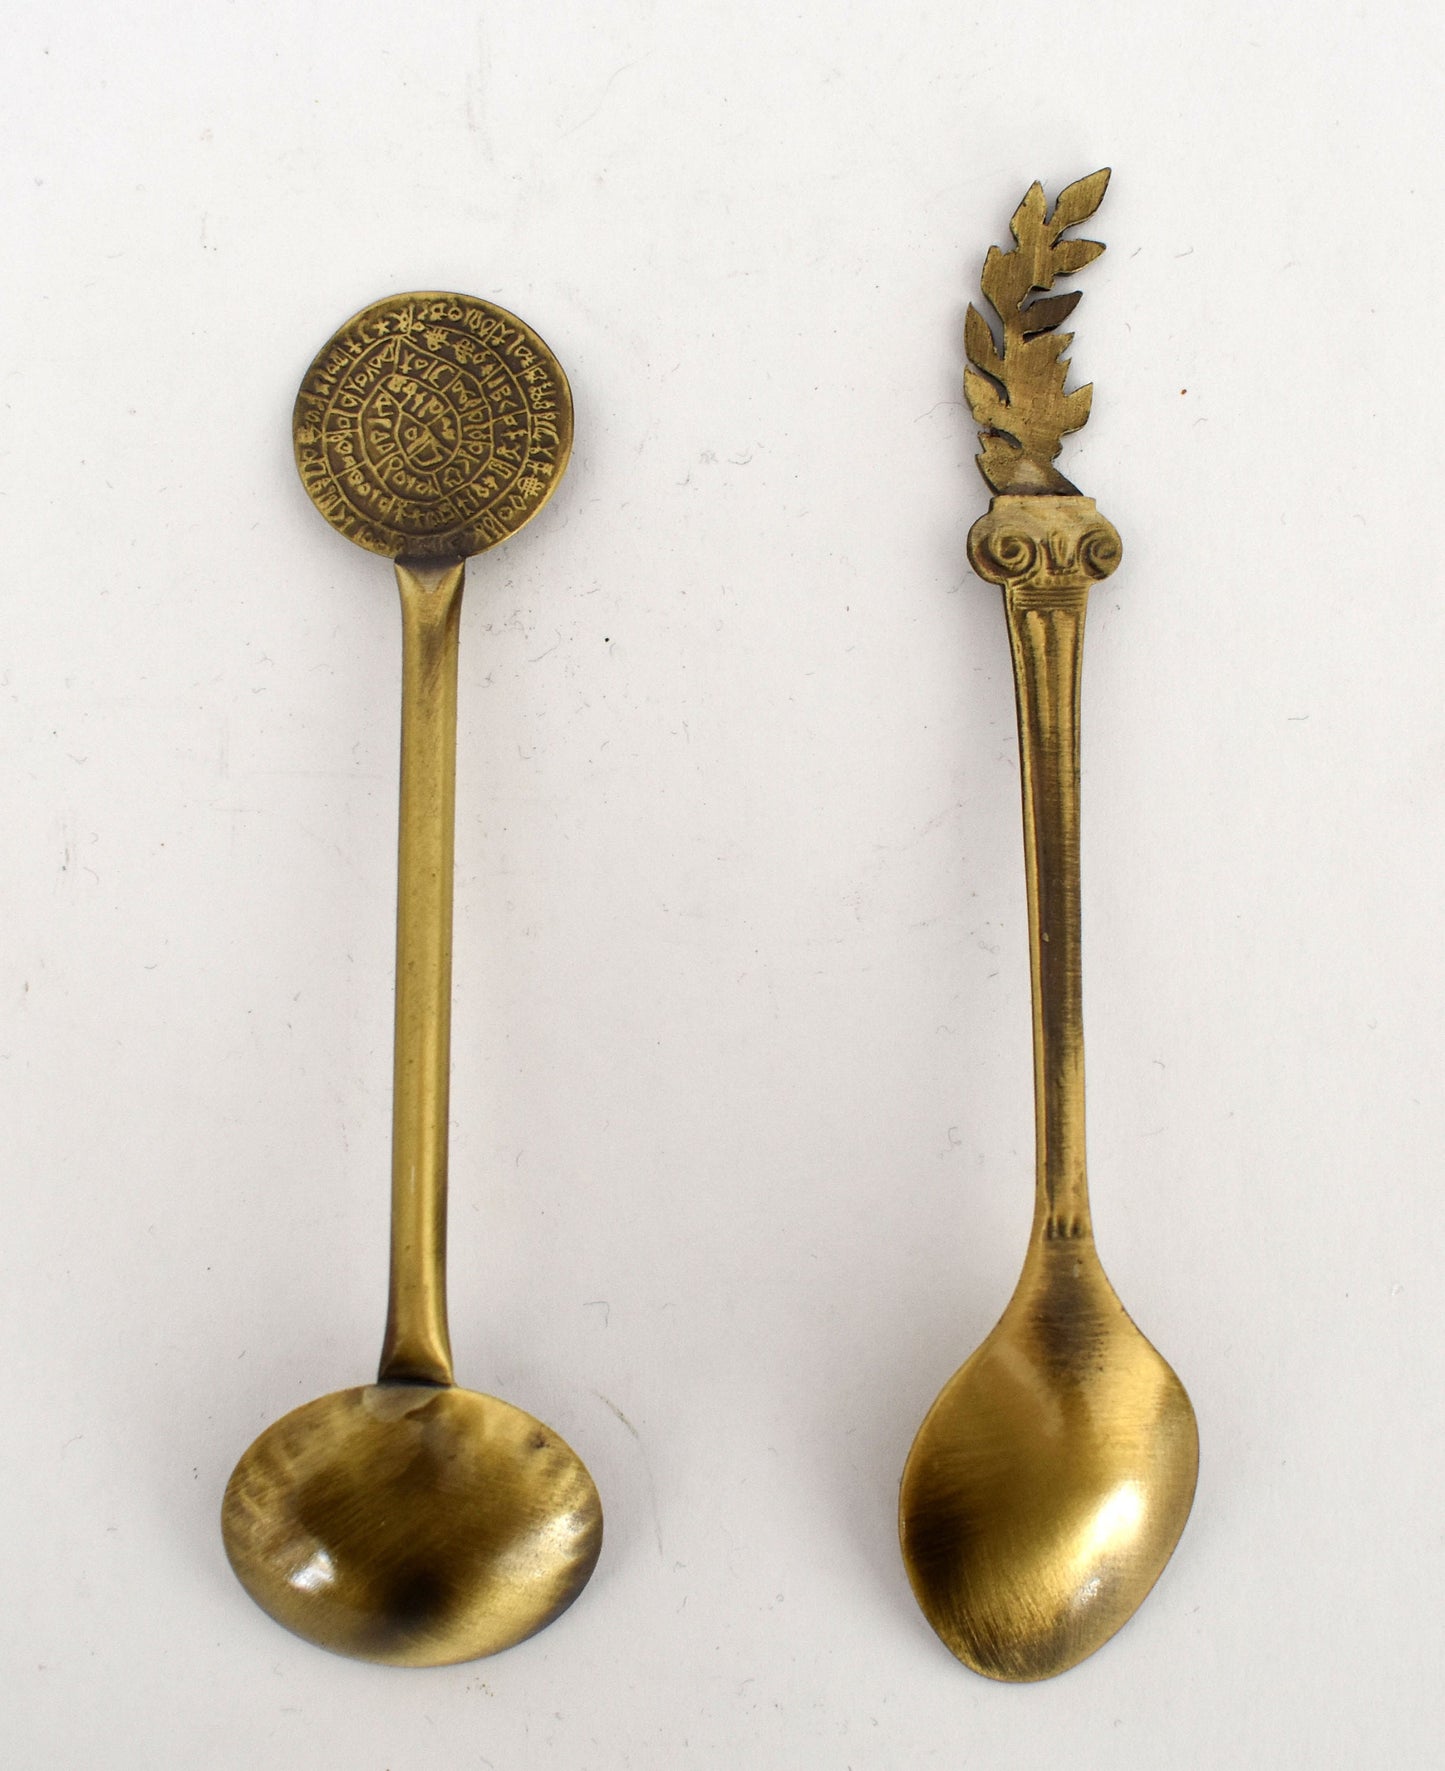 Set of two Spoons - Phaistos Disc,  Meander Motif - Olive Branch, Ionic Order - Miniatures - pure Bronze Sculpture